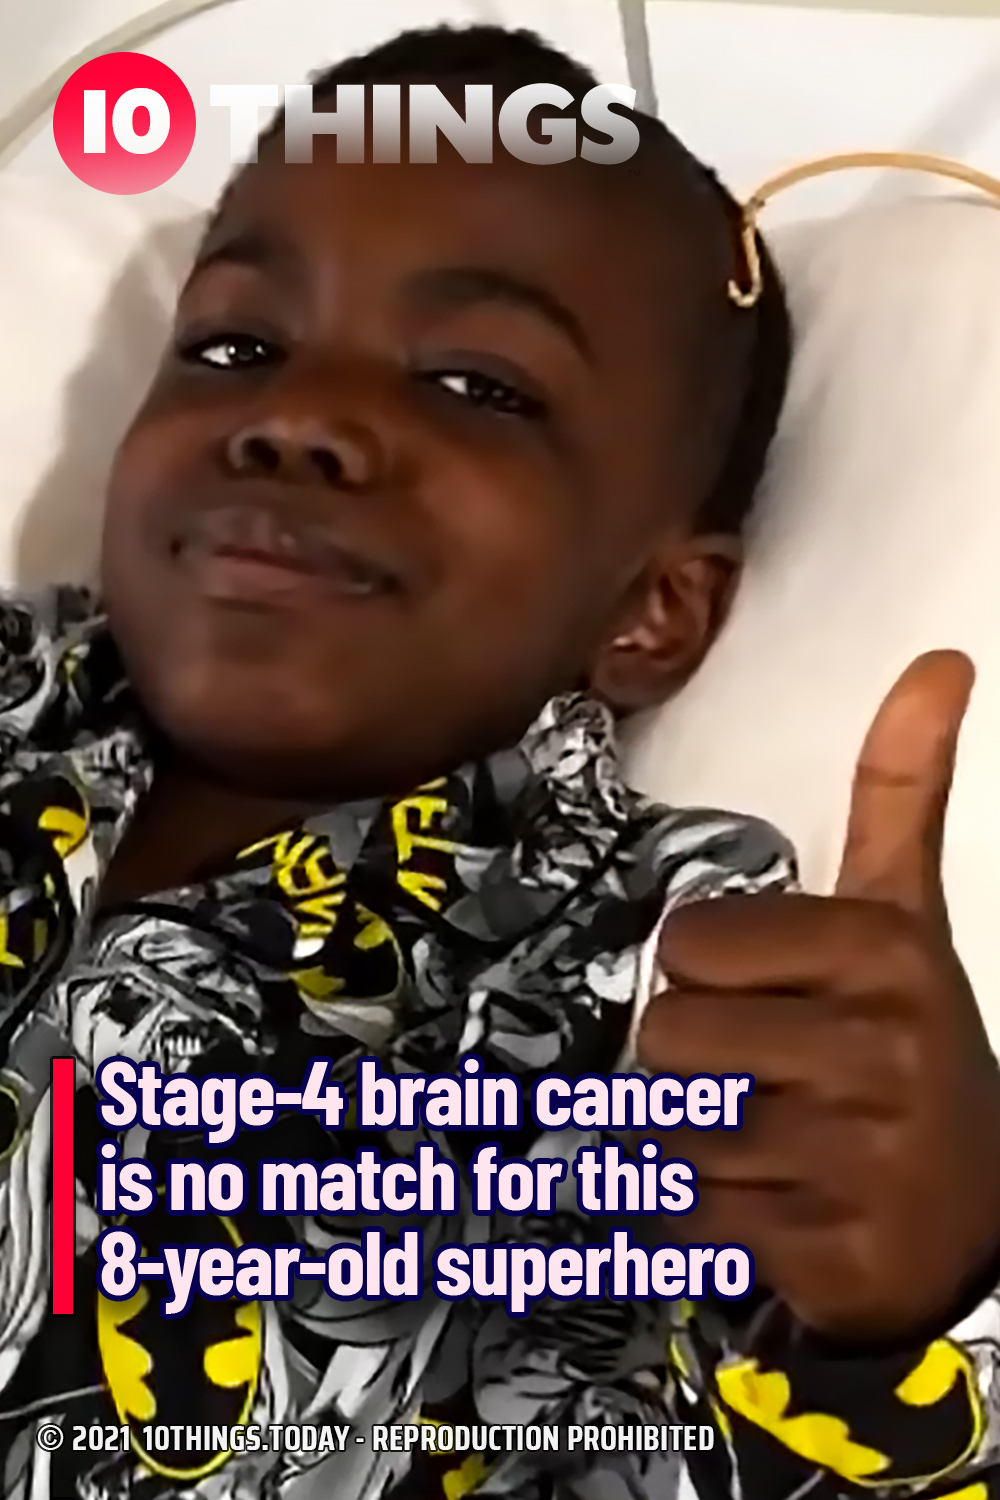 Stage-4 brain cancer is no match for this 8-year-old superhero